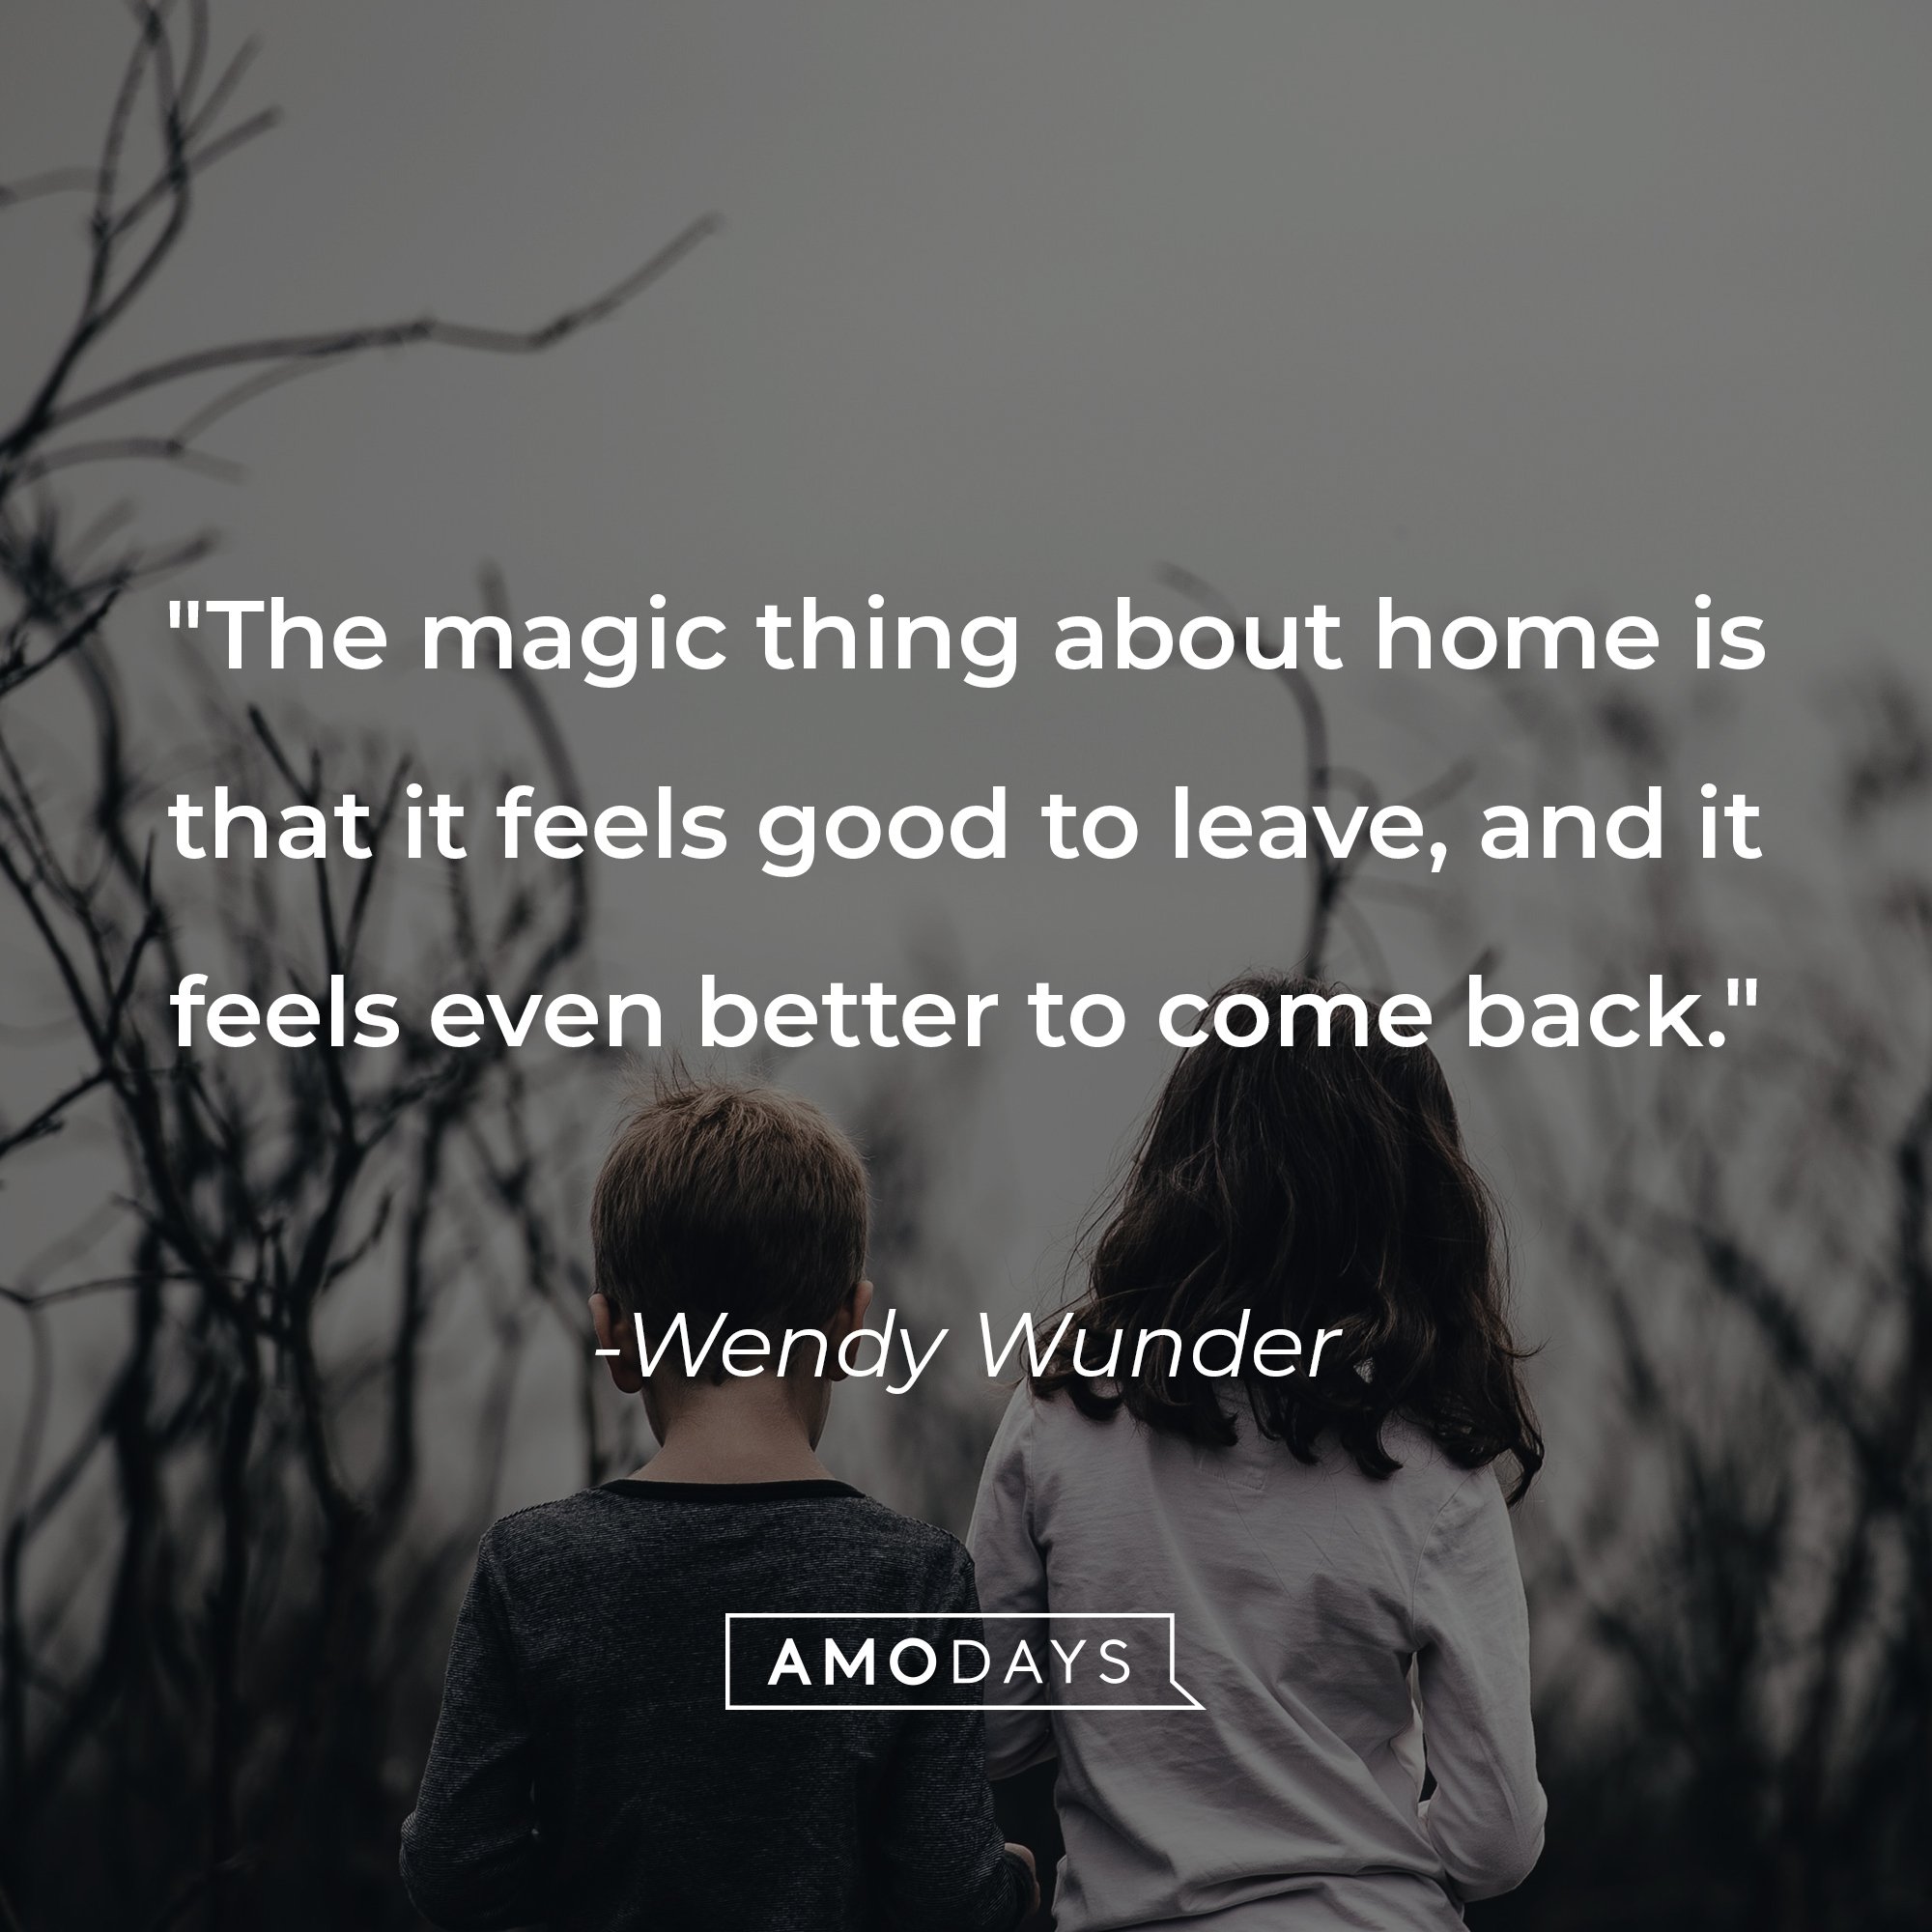 Wendy Wunder's quote: "The magic thing about home is that it feels good to leave, and it feels even better to come back." | Image: AmoDays